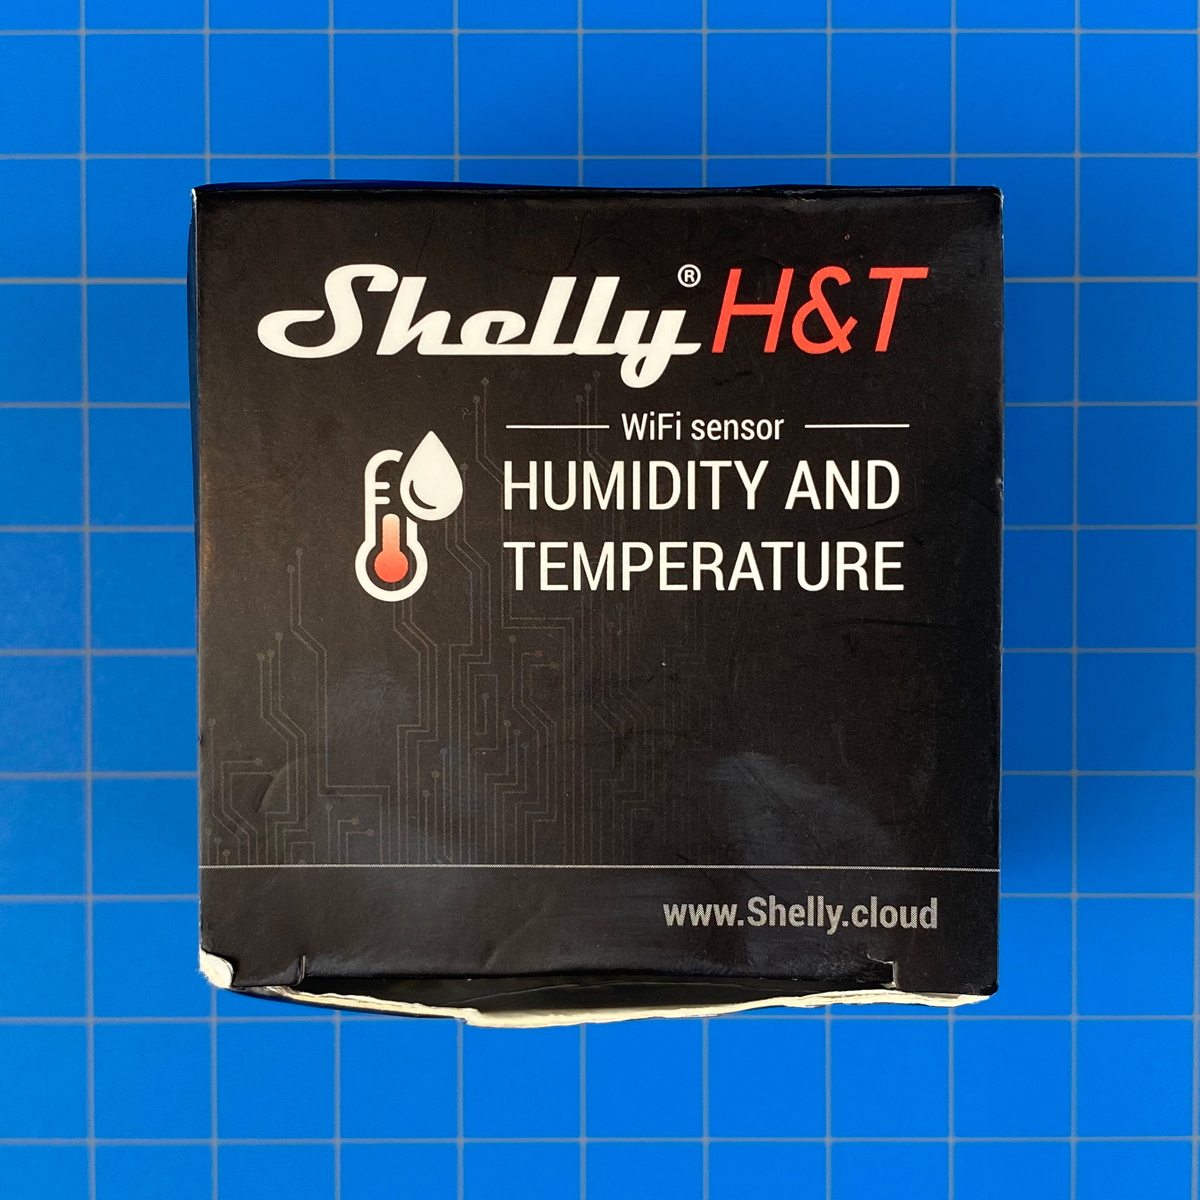 Shelly H&T User and Safety Guide